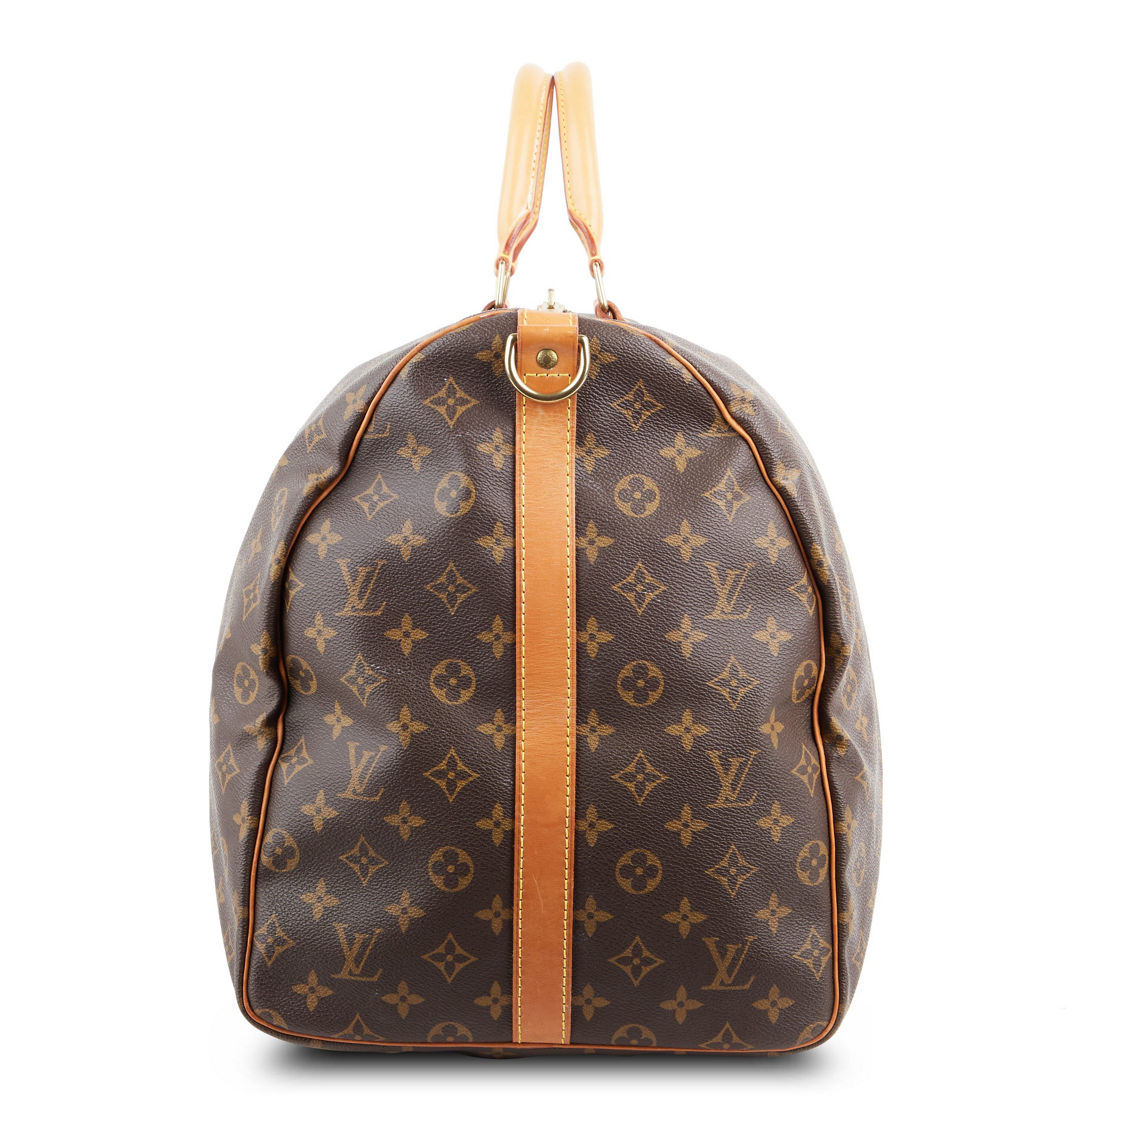 Louis Vuitton Keepall Bandouliere No Strap 60 Monogram (pre-owned), Handbags, Clothing & Accessories